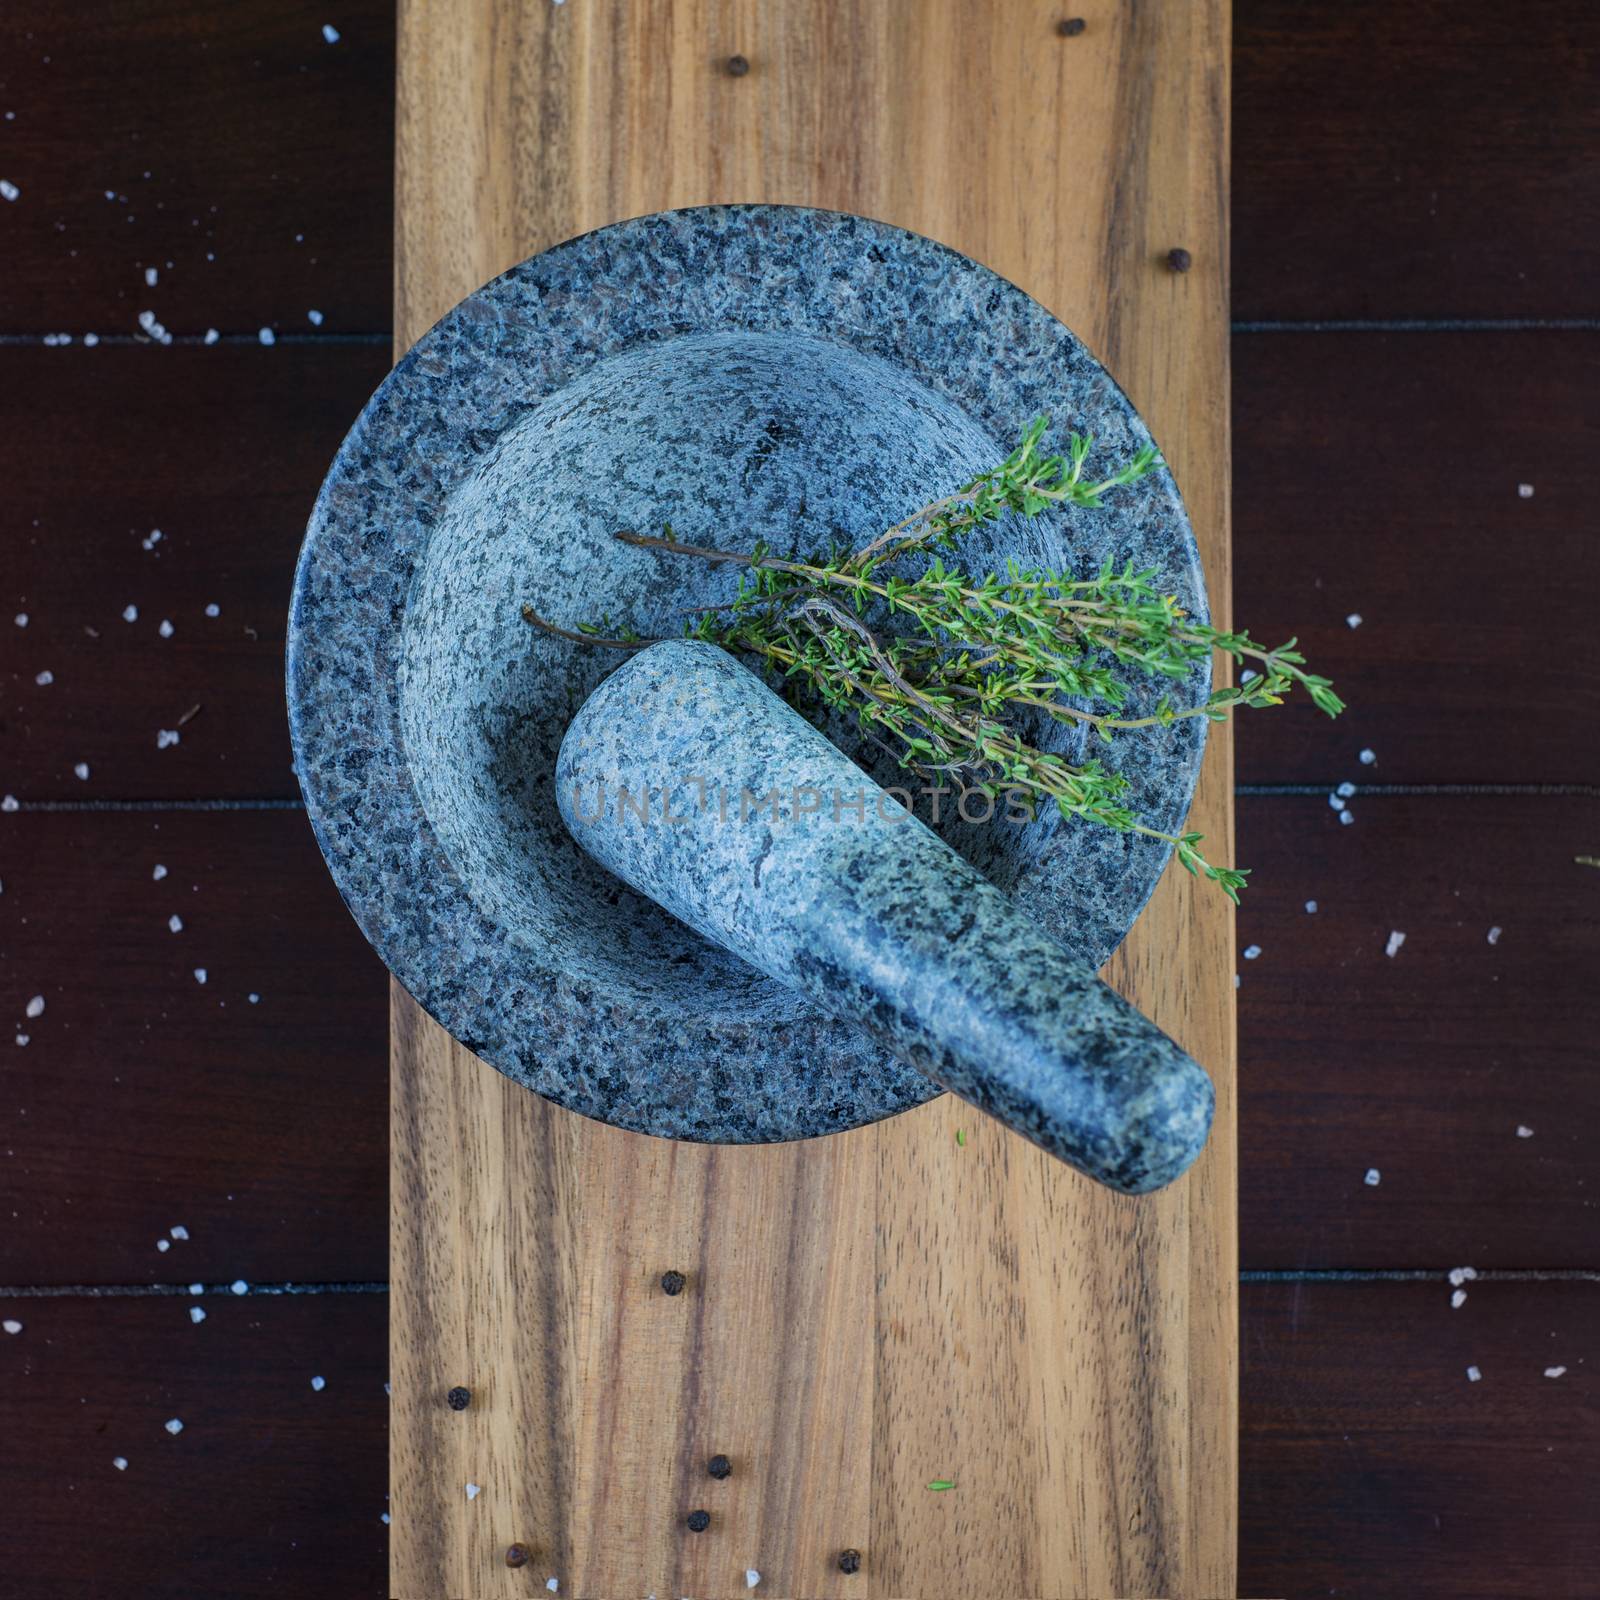 Granite stone mortar and thyme herb over wooden plank